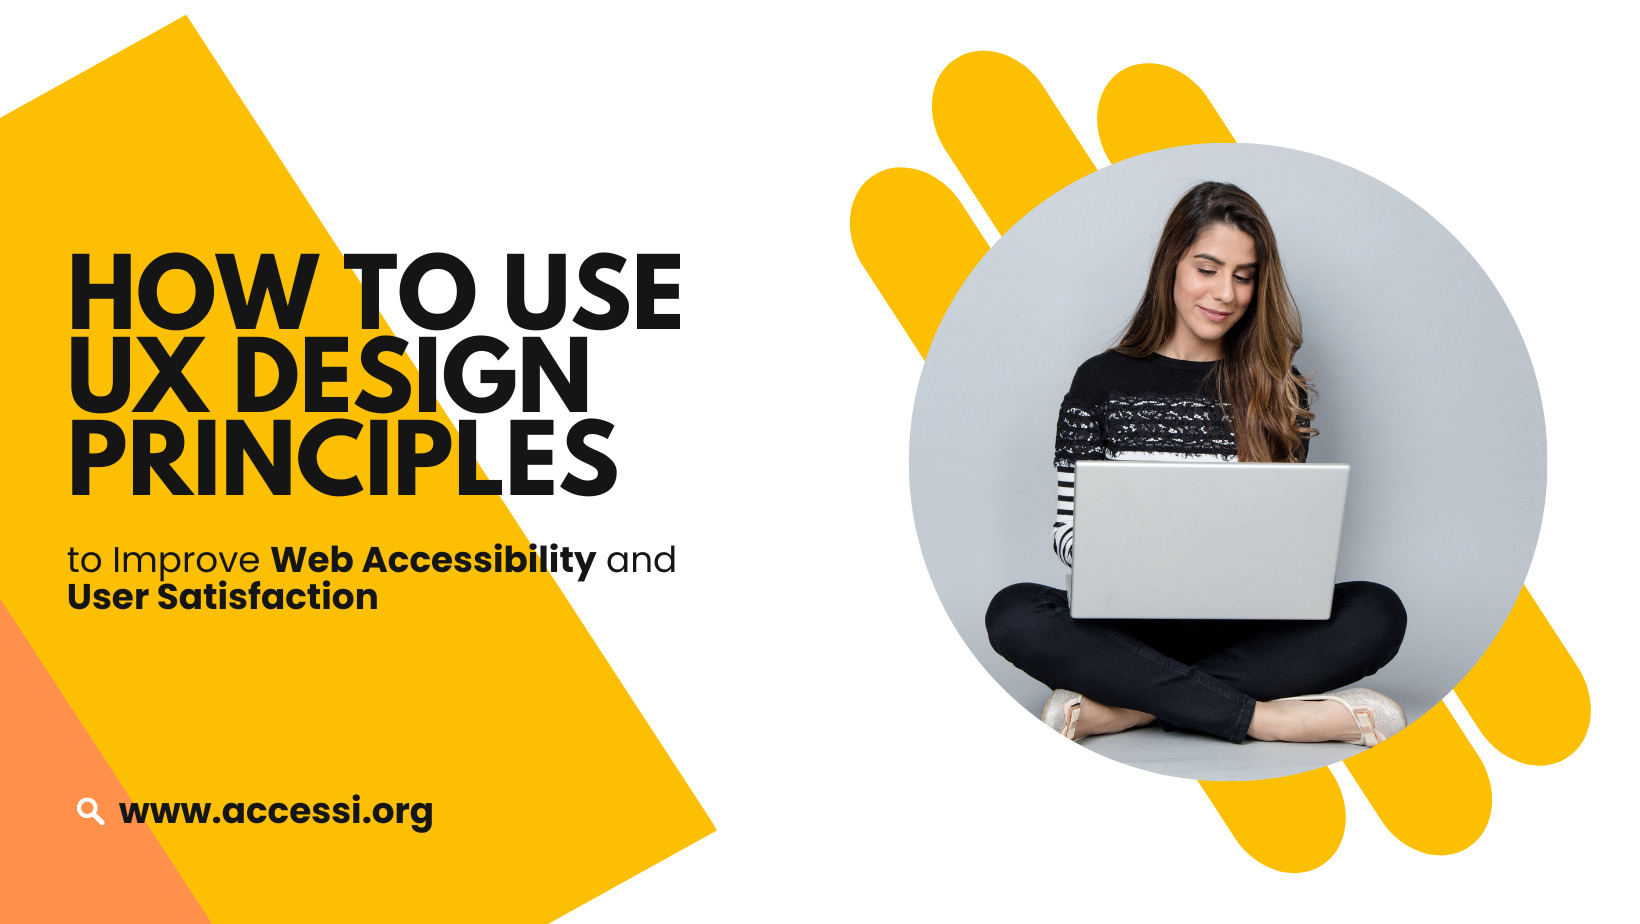 UX Design and Web Accessibility